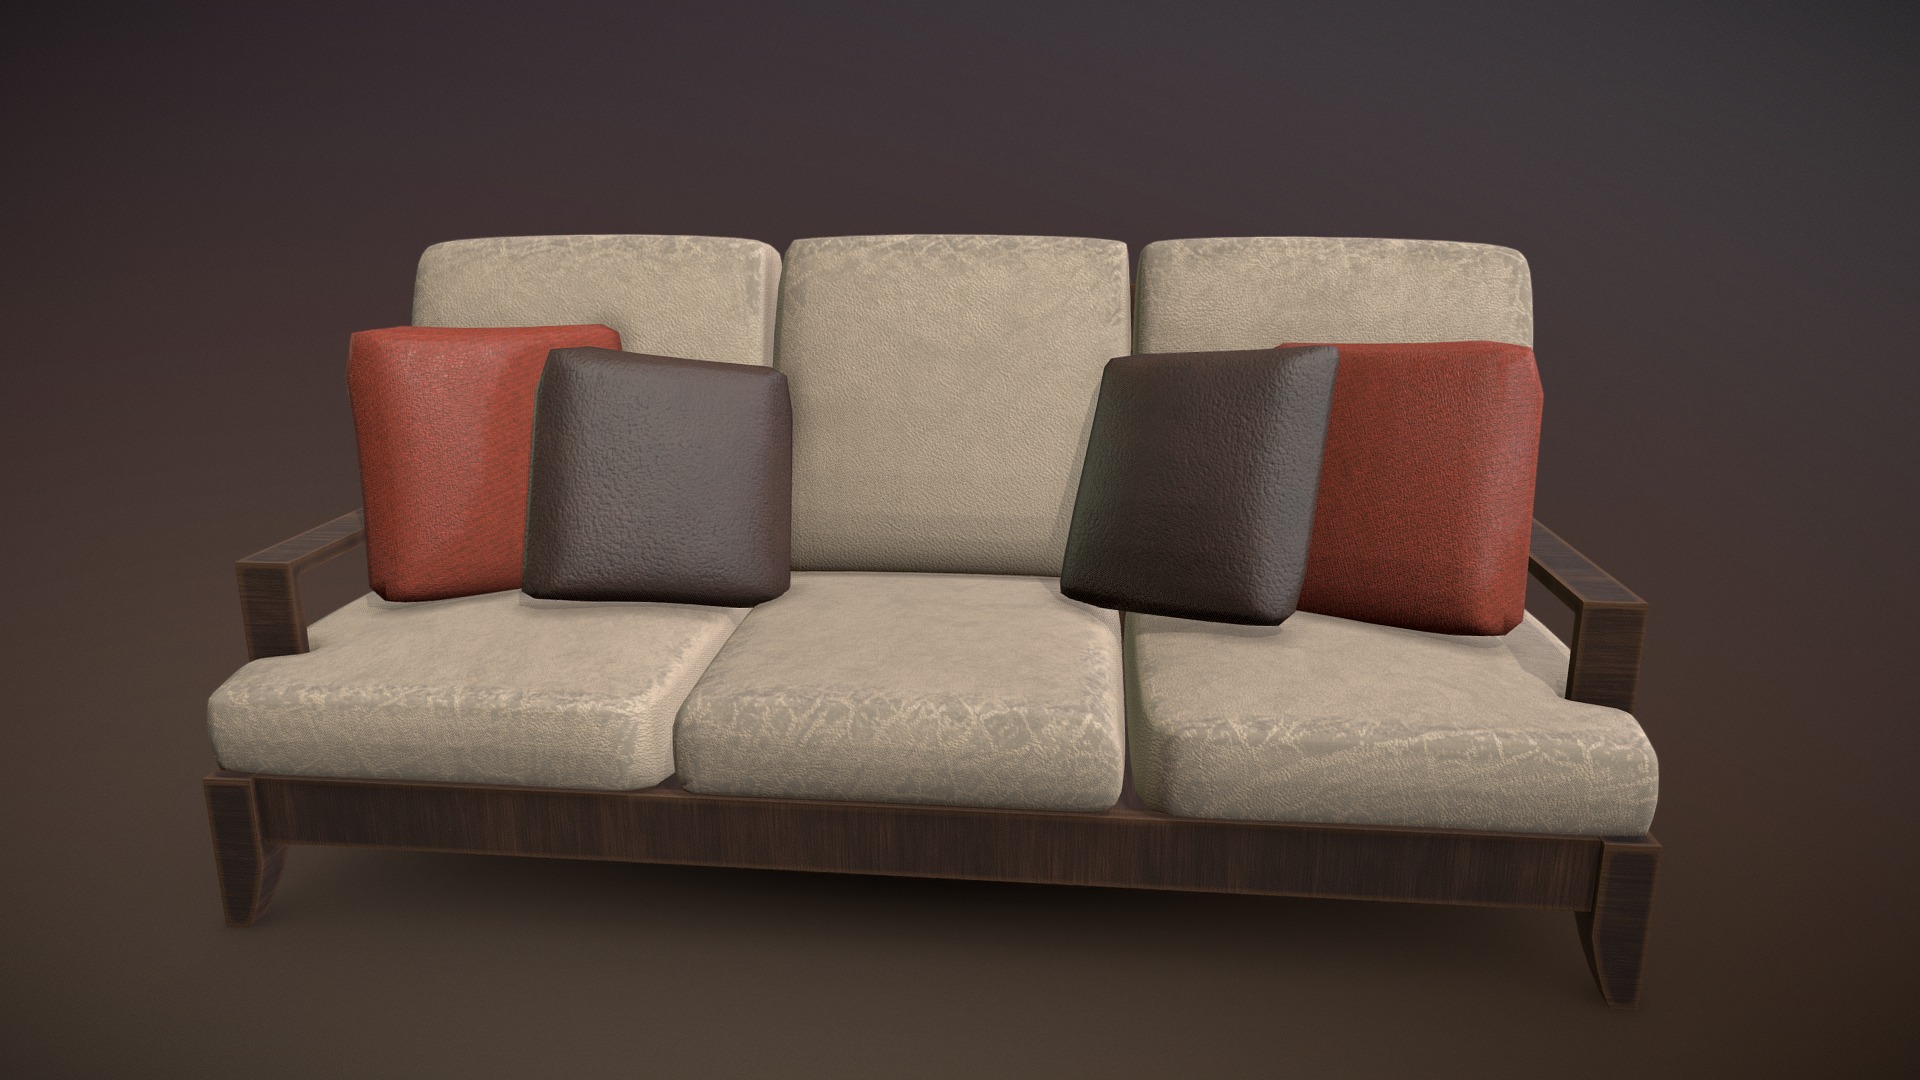 3D model Wooden sofa couch – Lowpoly - This is a 3D model of the Wooden sofa couch - Lowpoly. The 3D model is about a couch with pillows.